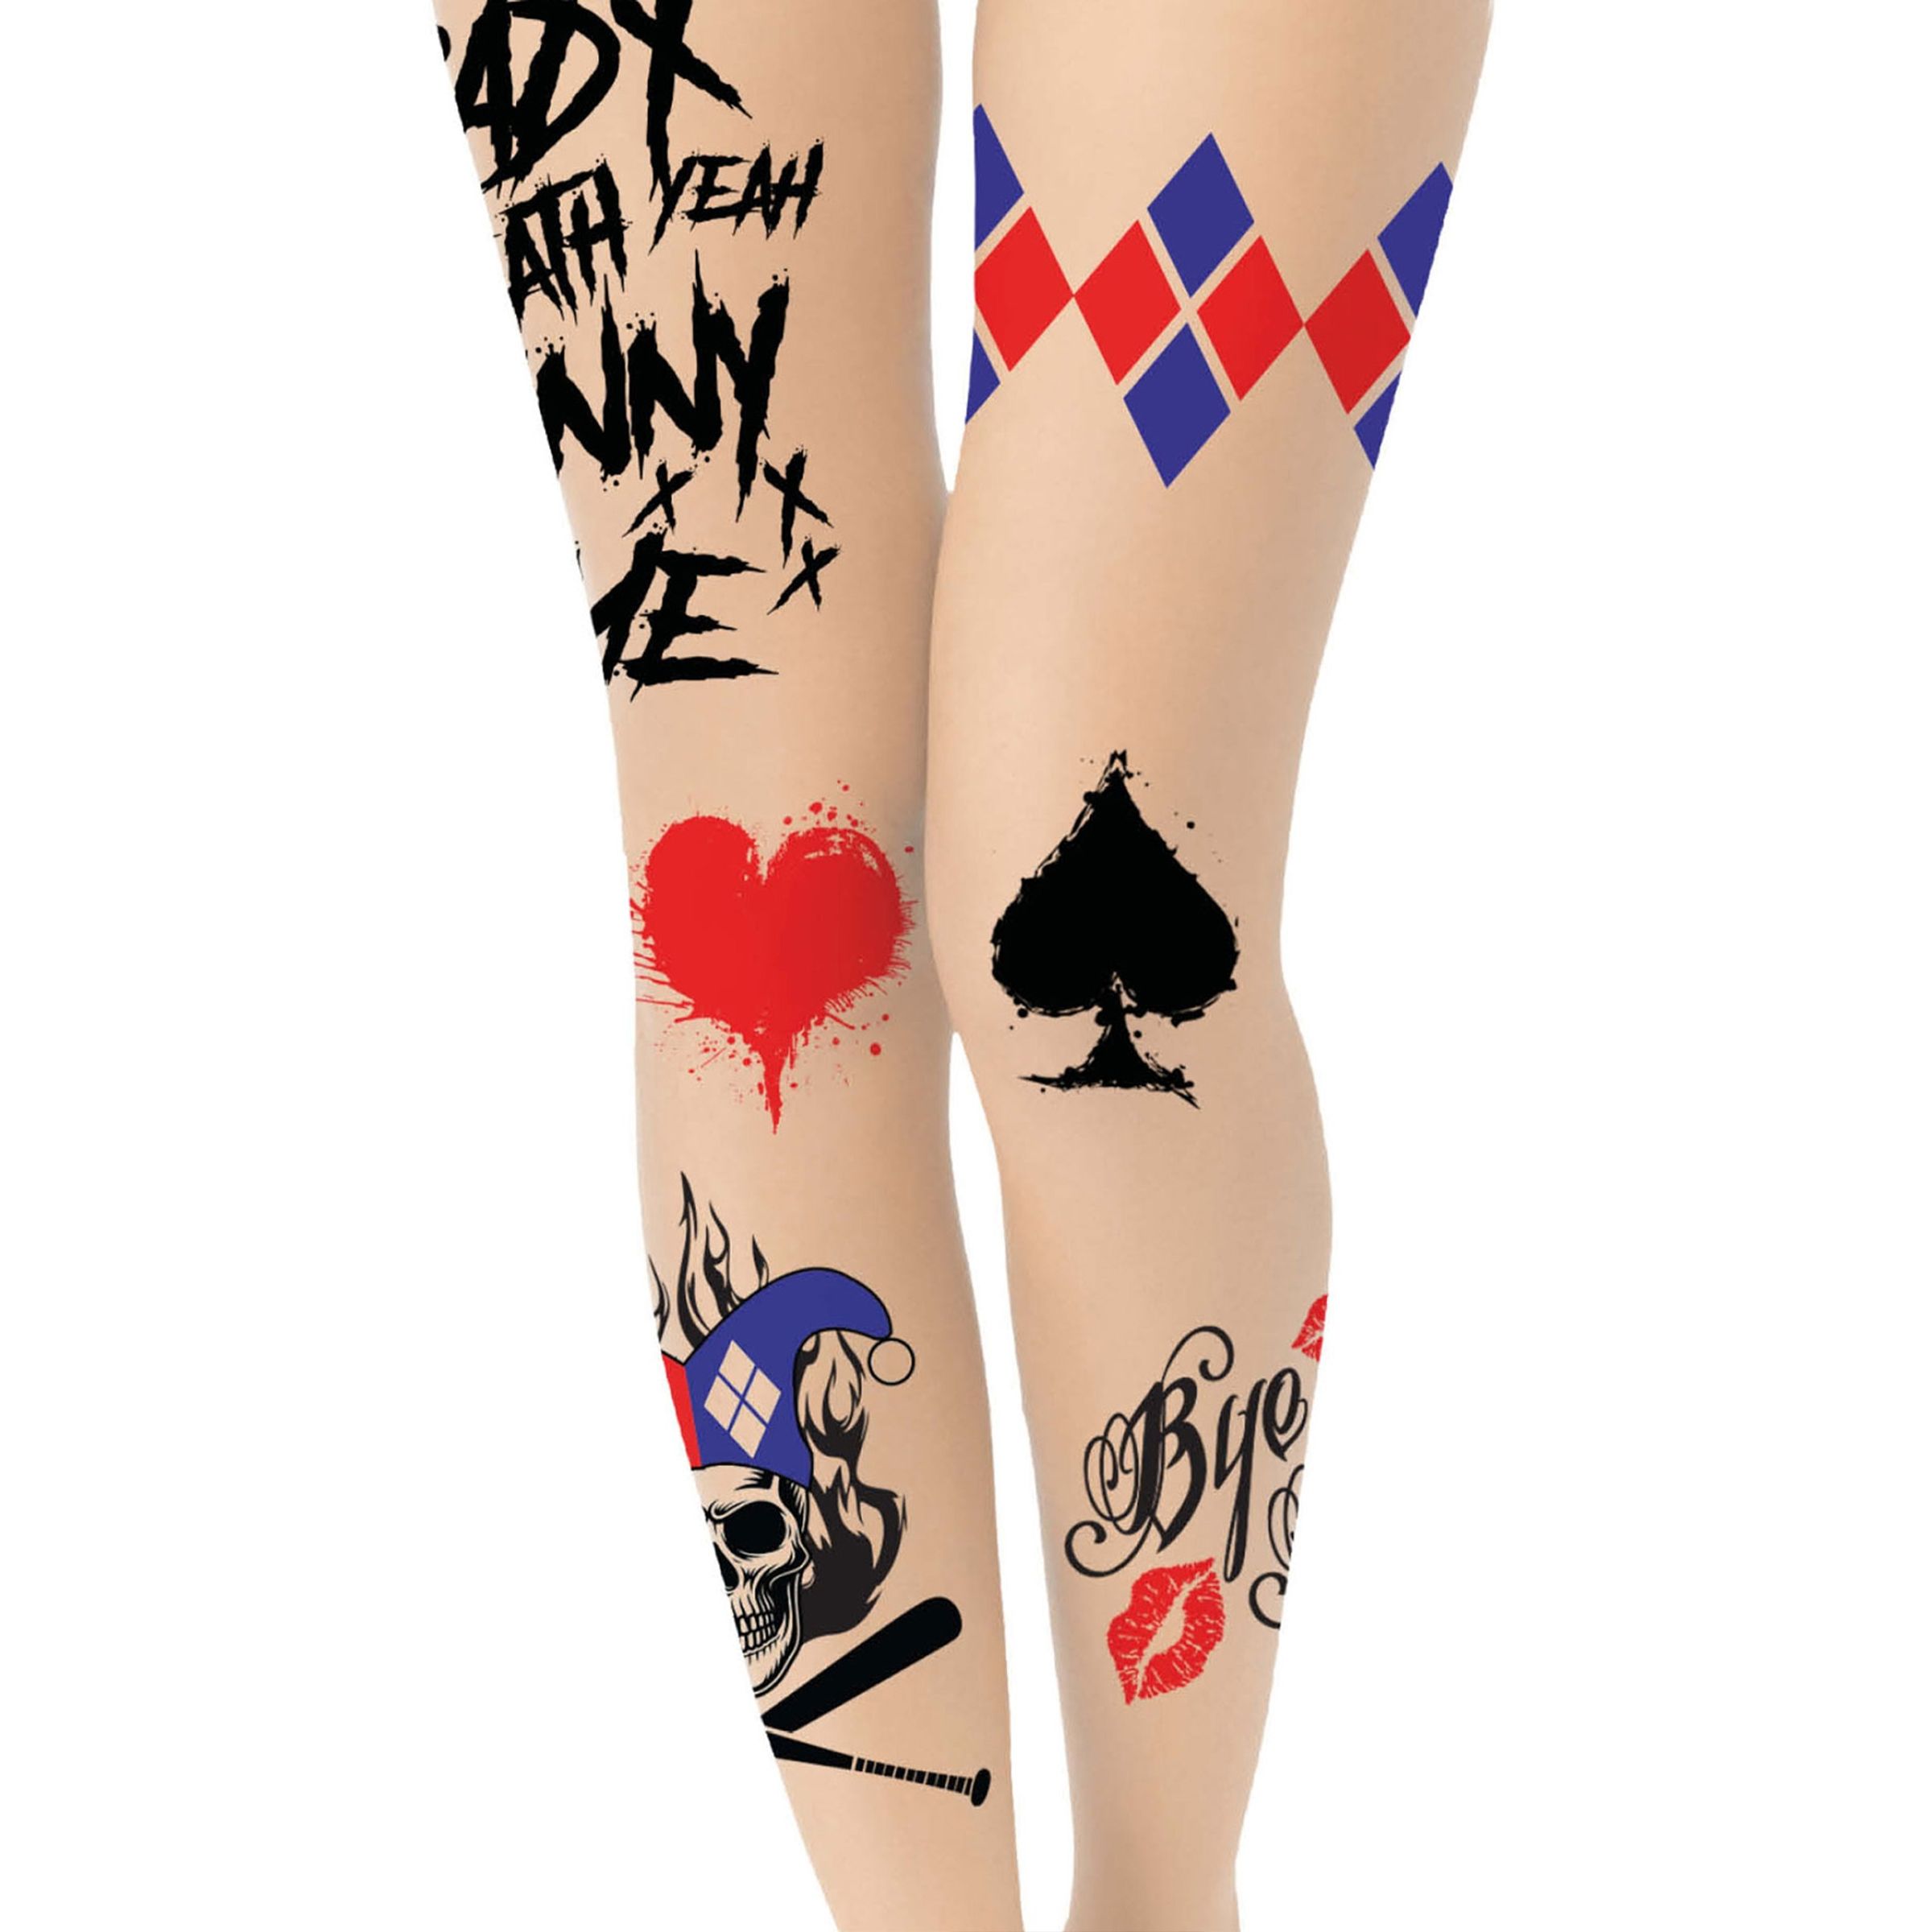 Harley Quinn Tights - One size